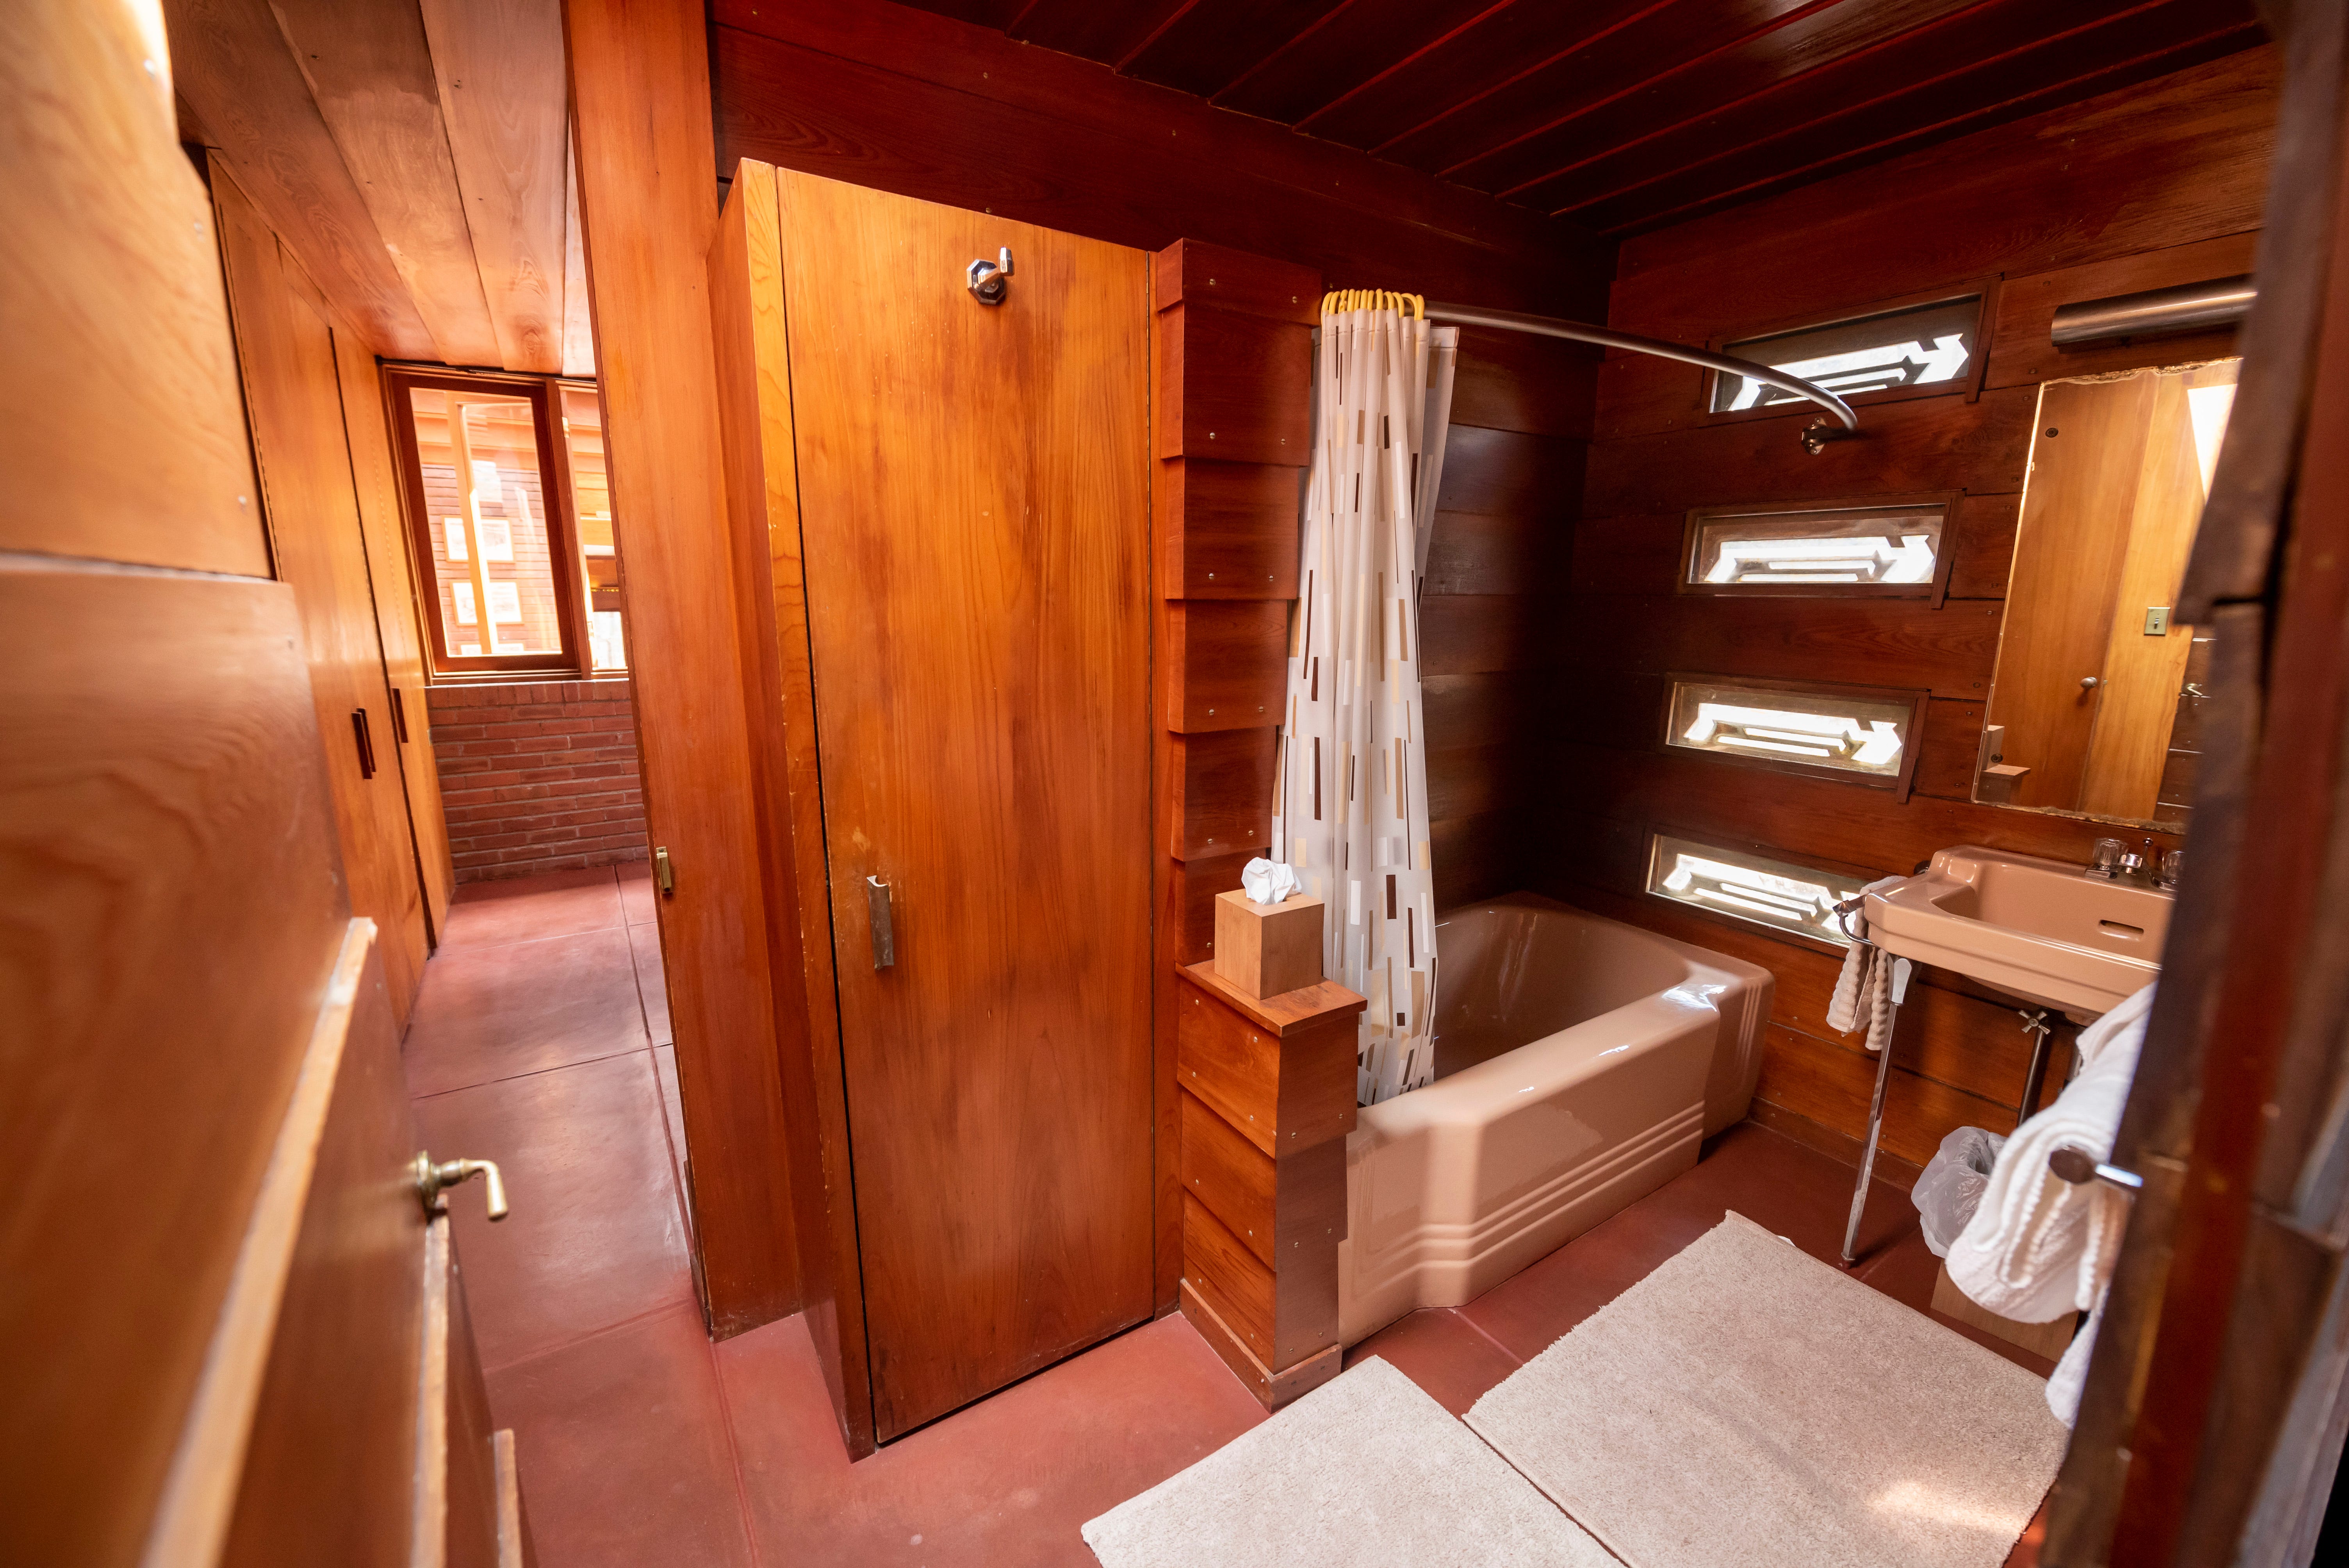 A Jack-and-Jill bathroom between two of the bedrooms. The house has three and a half baths.